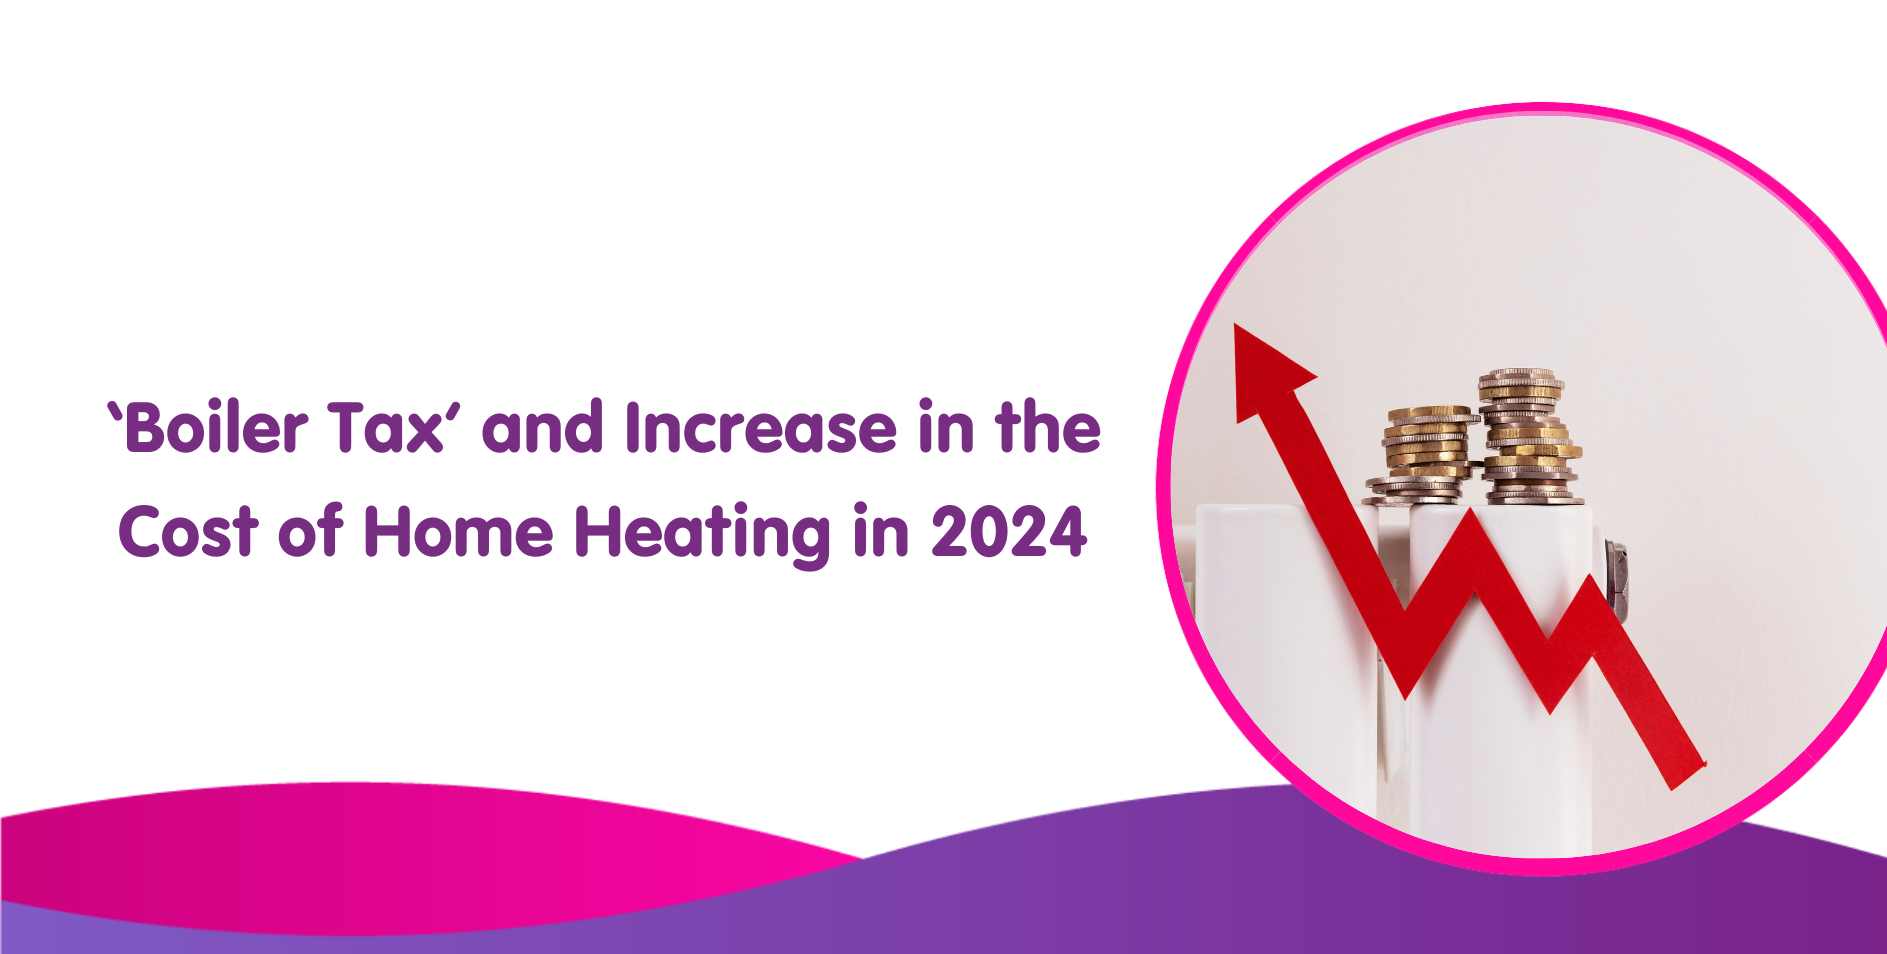 Boiler tax rising costs of heating